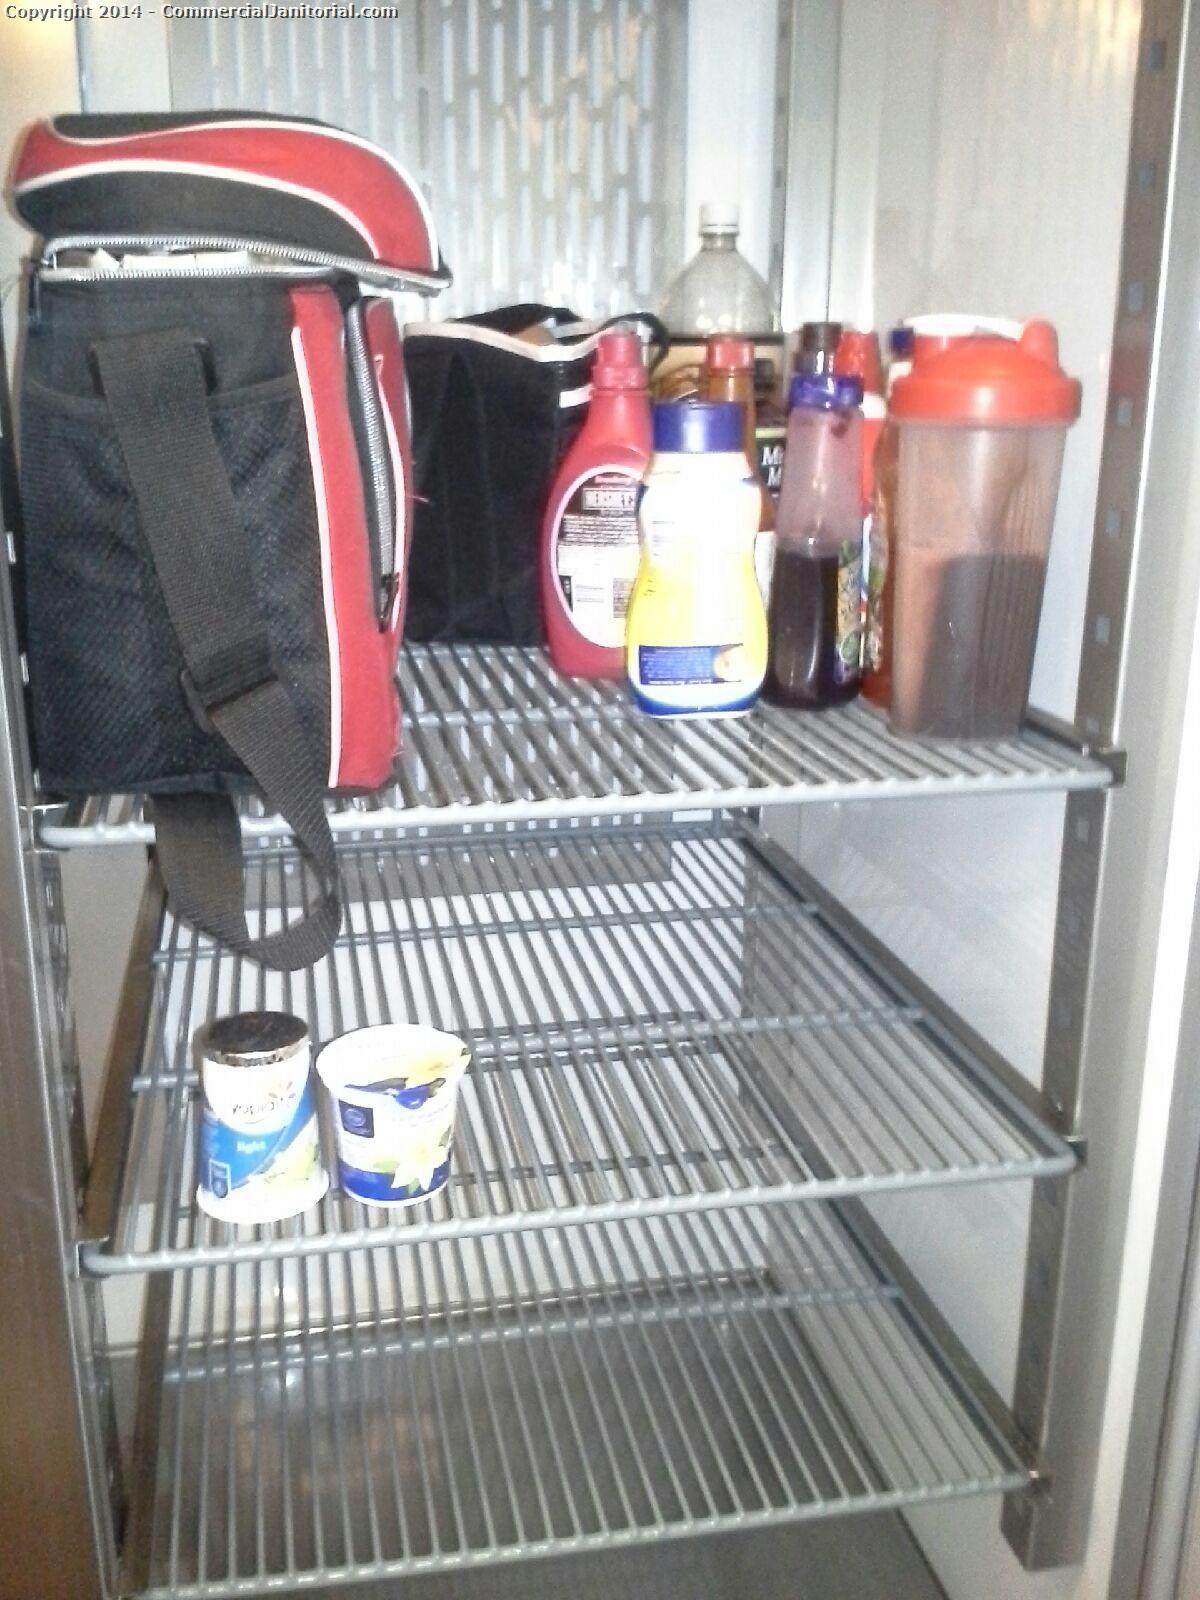 Refrigerators got cleaned, the only thing left was lunch boxes and couple of other items. 